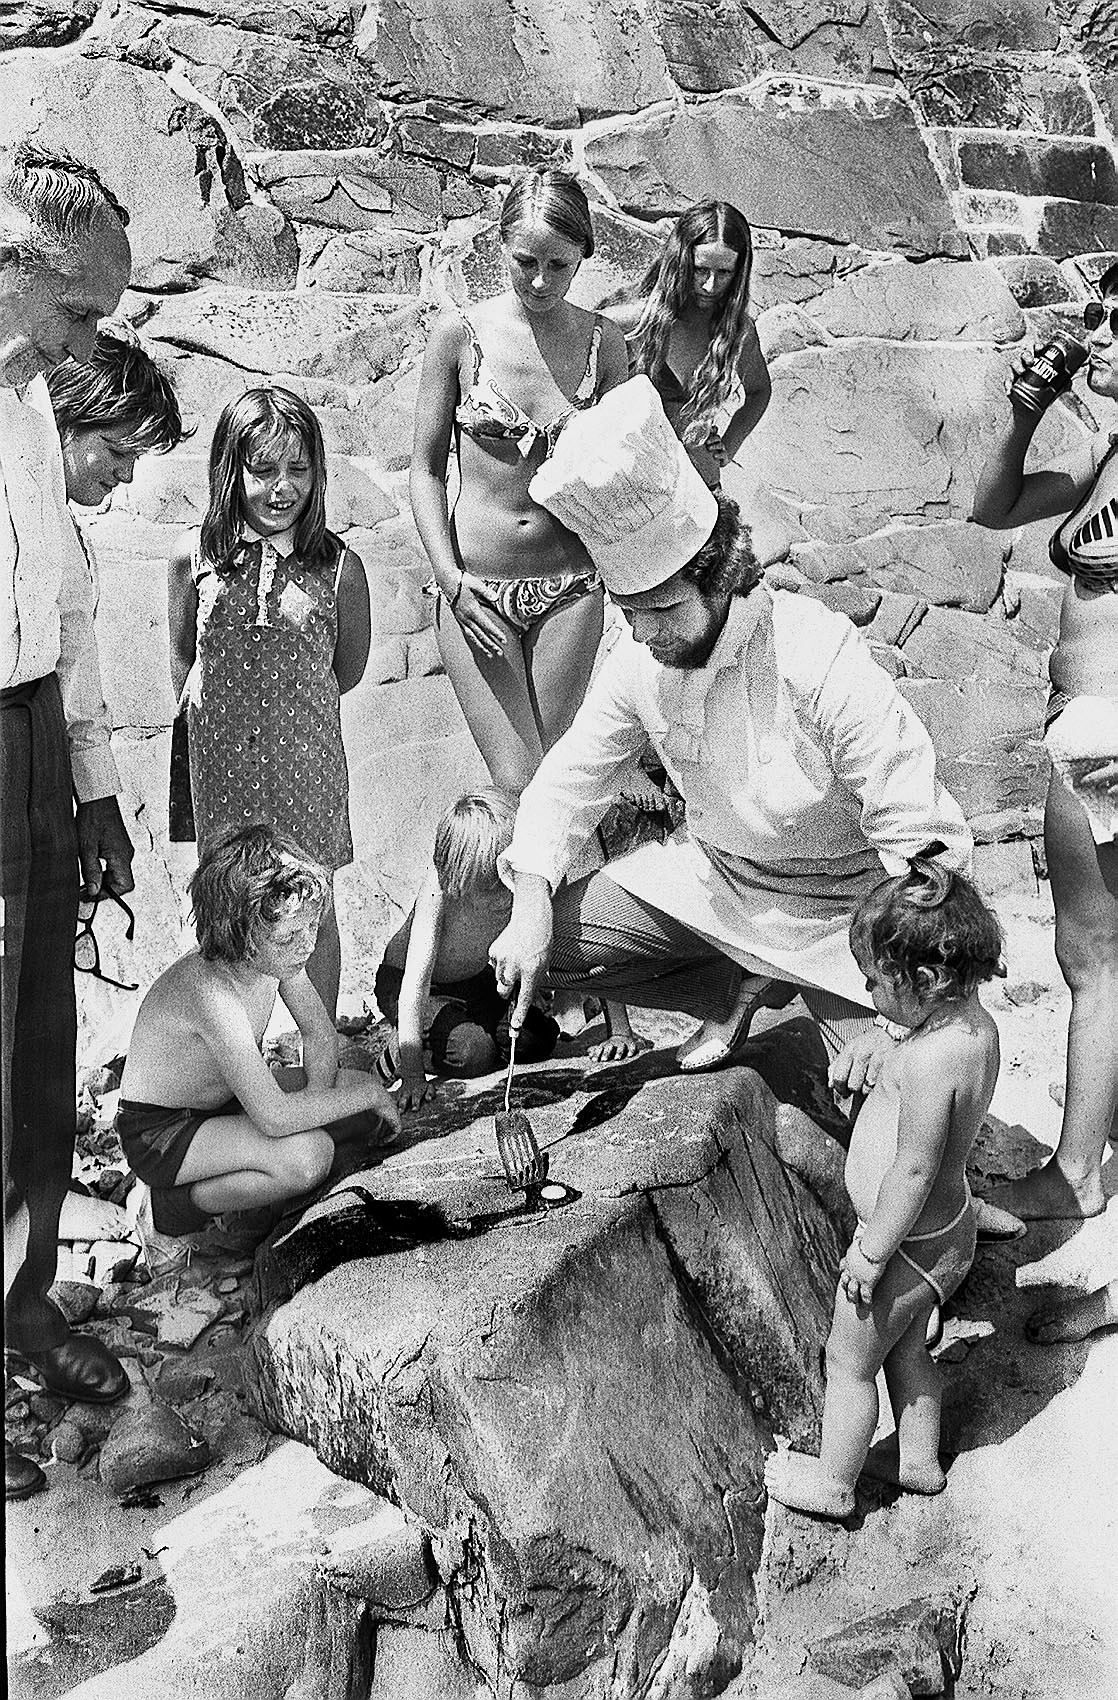 CHILDREN AND OTHER SPECTATORS WATCH AS A CHEF TRIES HIS HAND AT FRYING AN EGG ON THE BEACH DURING THE LONG HOT SUMMER OF 1976 (29017039)